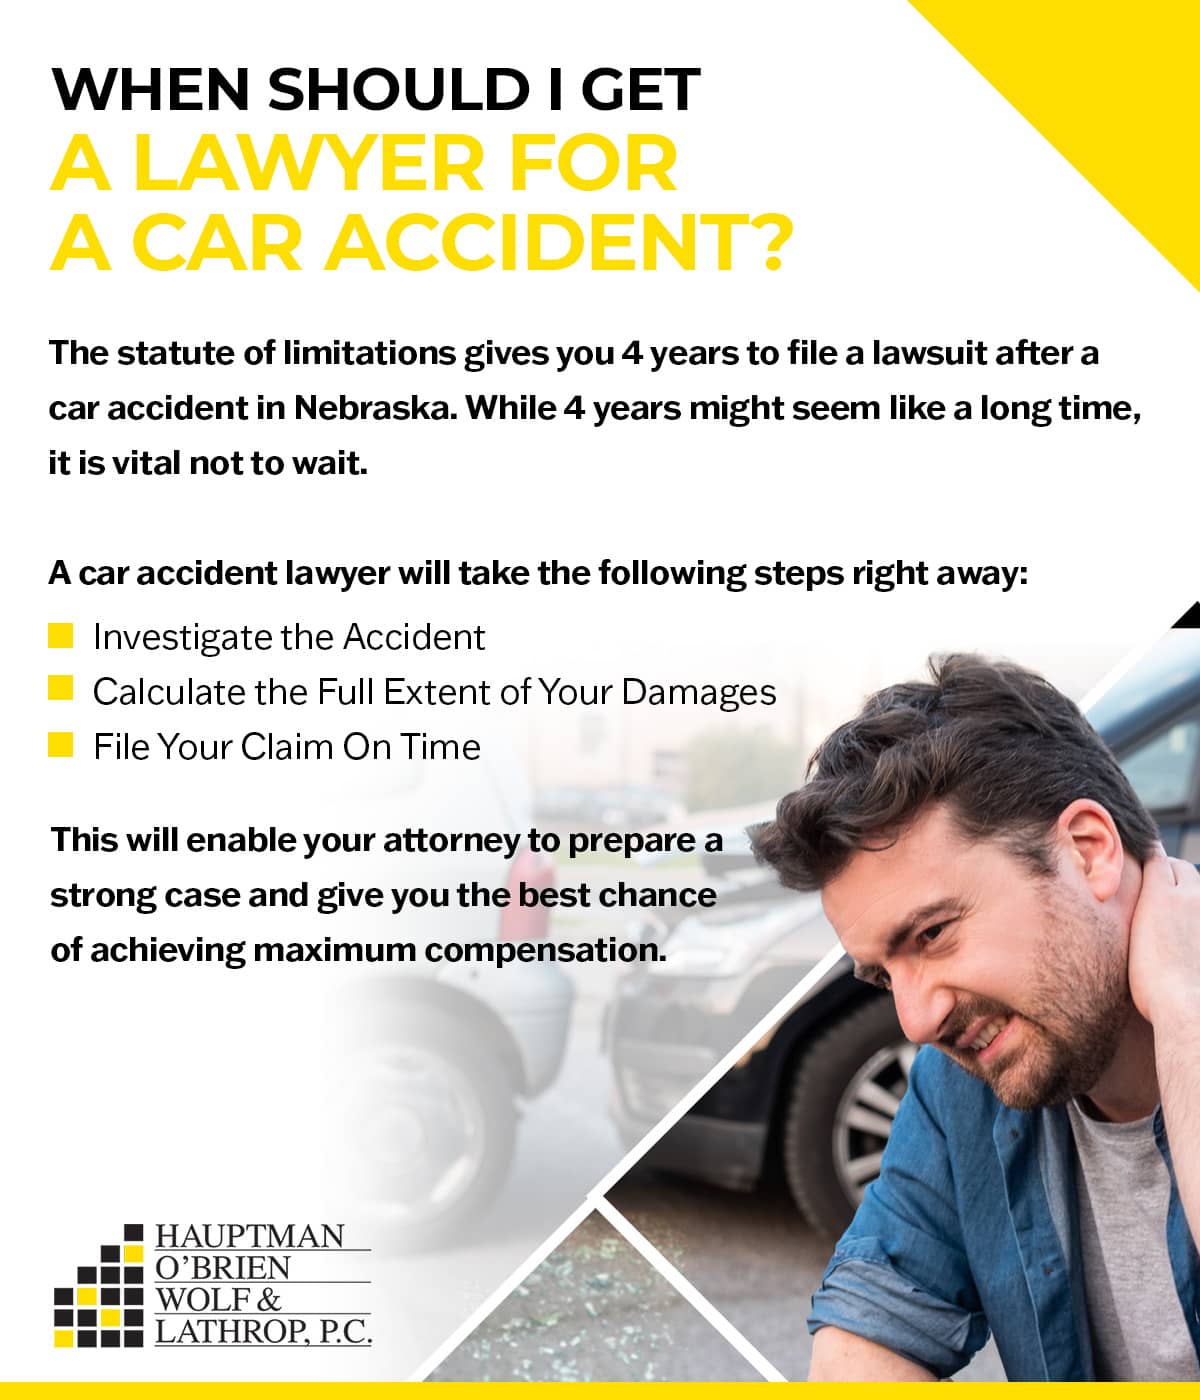 What Type of Attorney Should I Consult for a Car Accident?